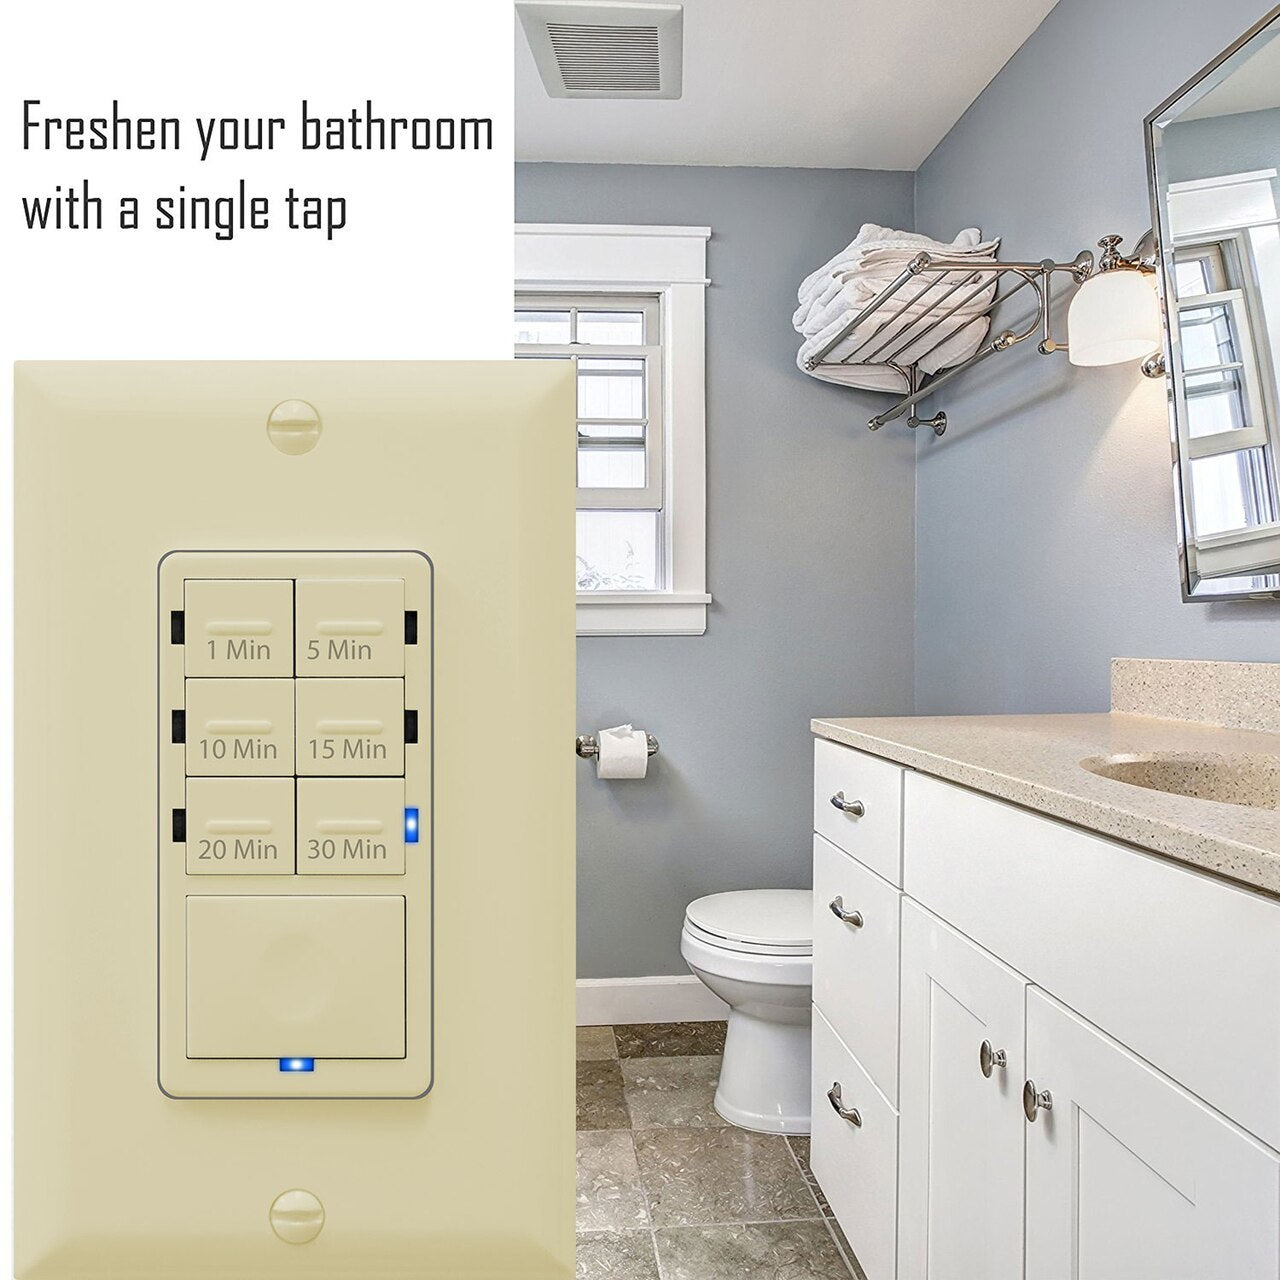 Countdown Timer Switch for bathroom fans and household lights, 1-5-10-15-20-30 Min Settings with Manual Override, Always On Blue LED, Neutral Wire Required, Ivory Four Bros Lighting